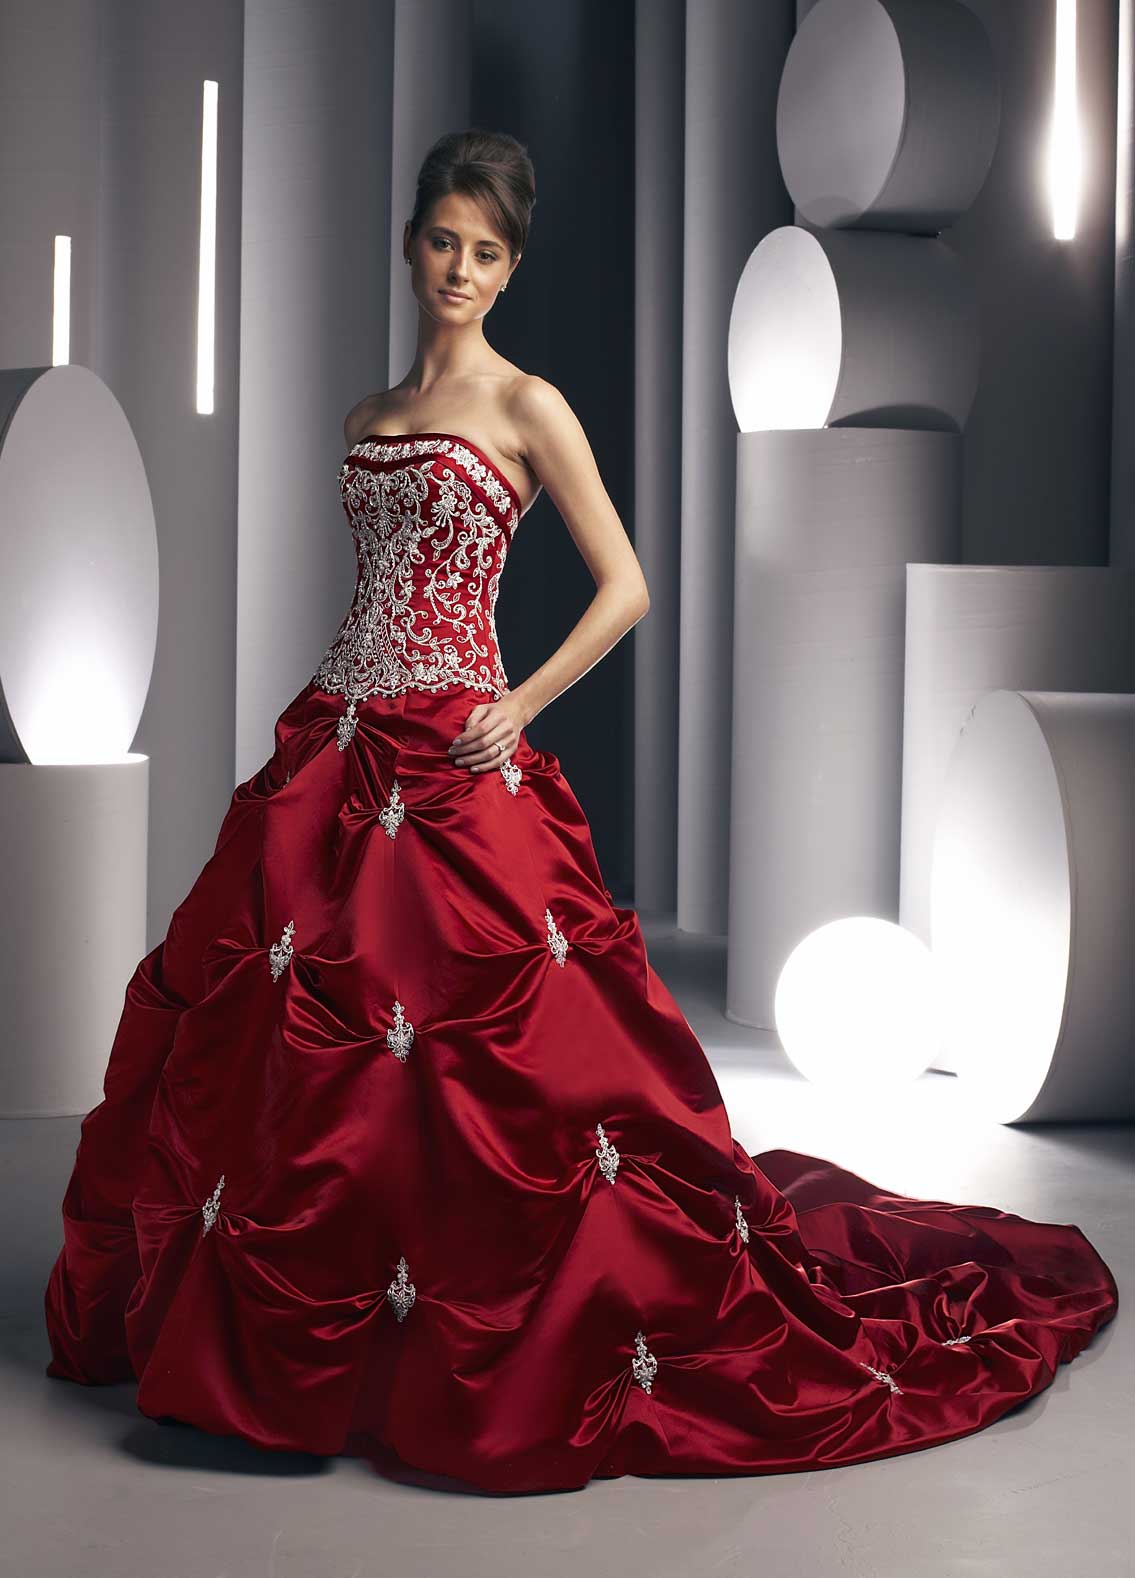 Great Wedding Dresses With Red Detail of the decade The ultimate guide 